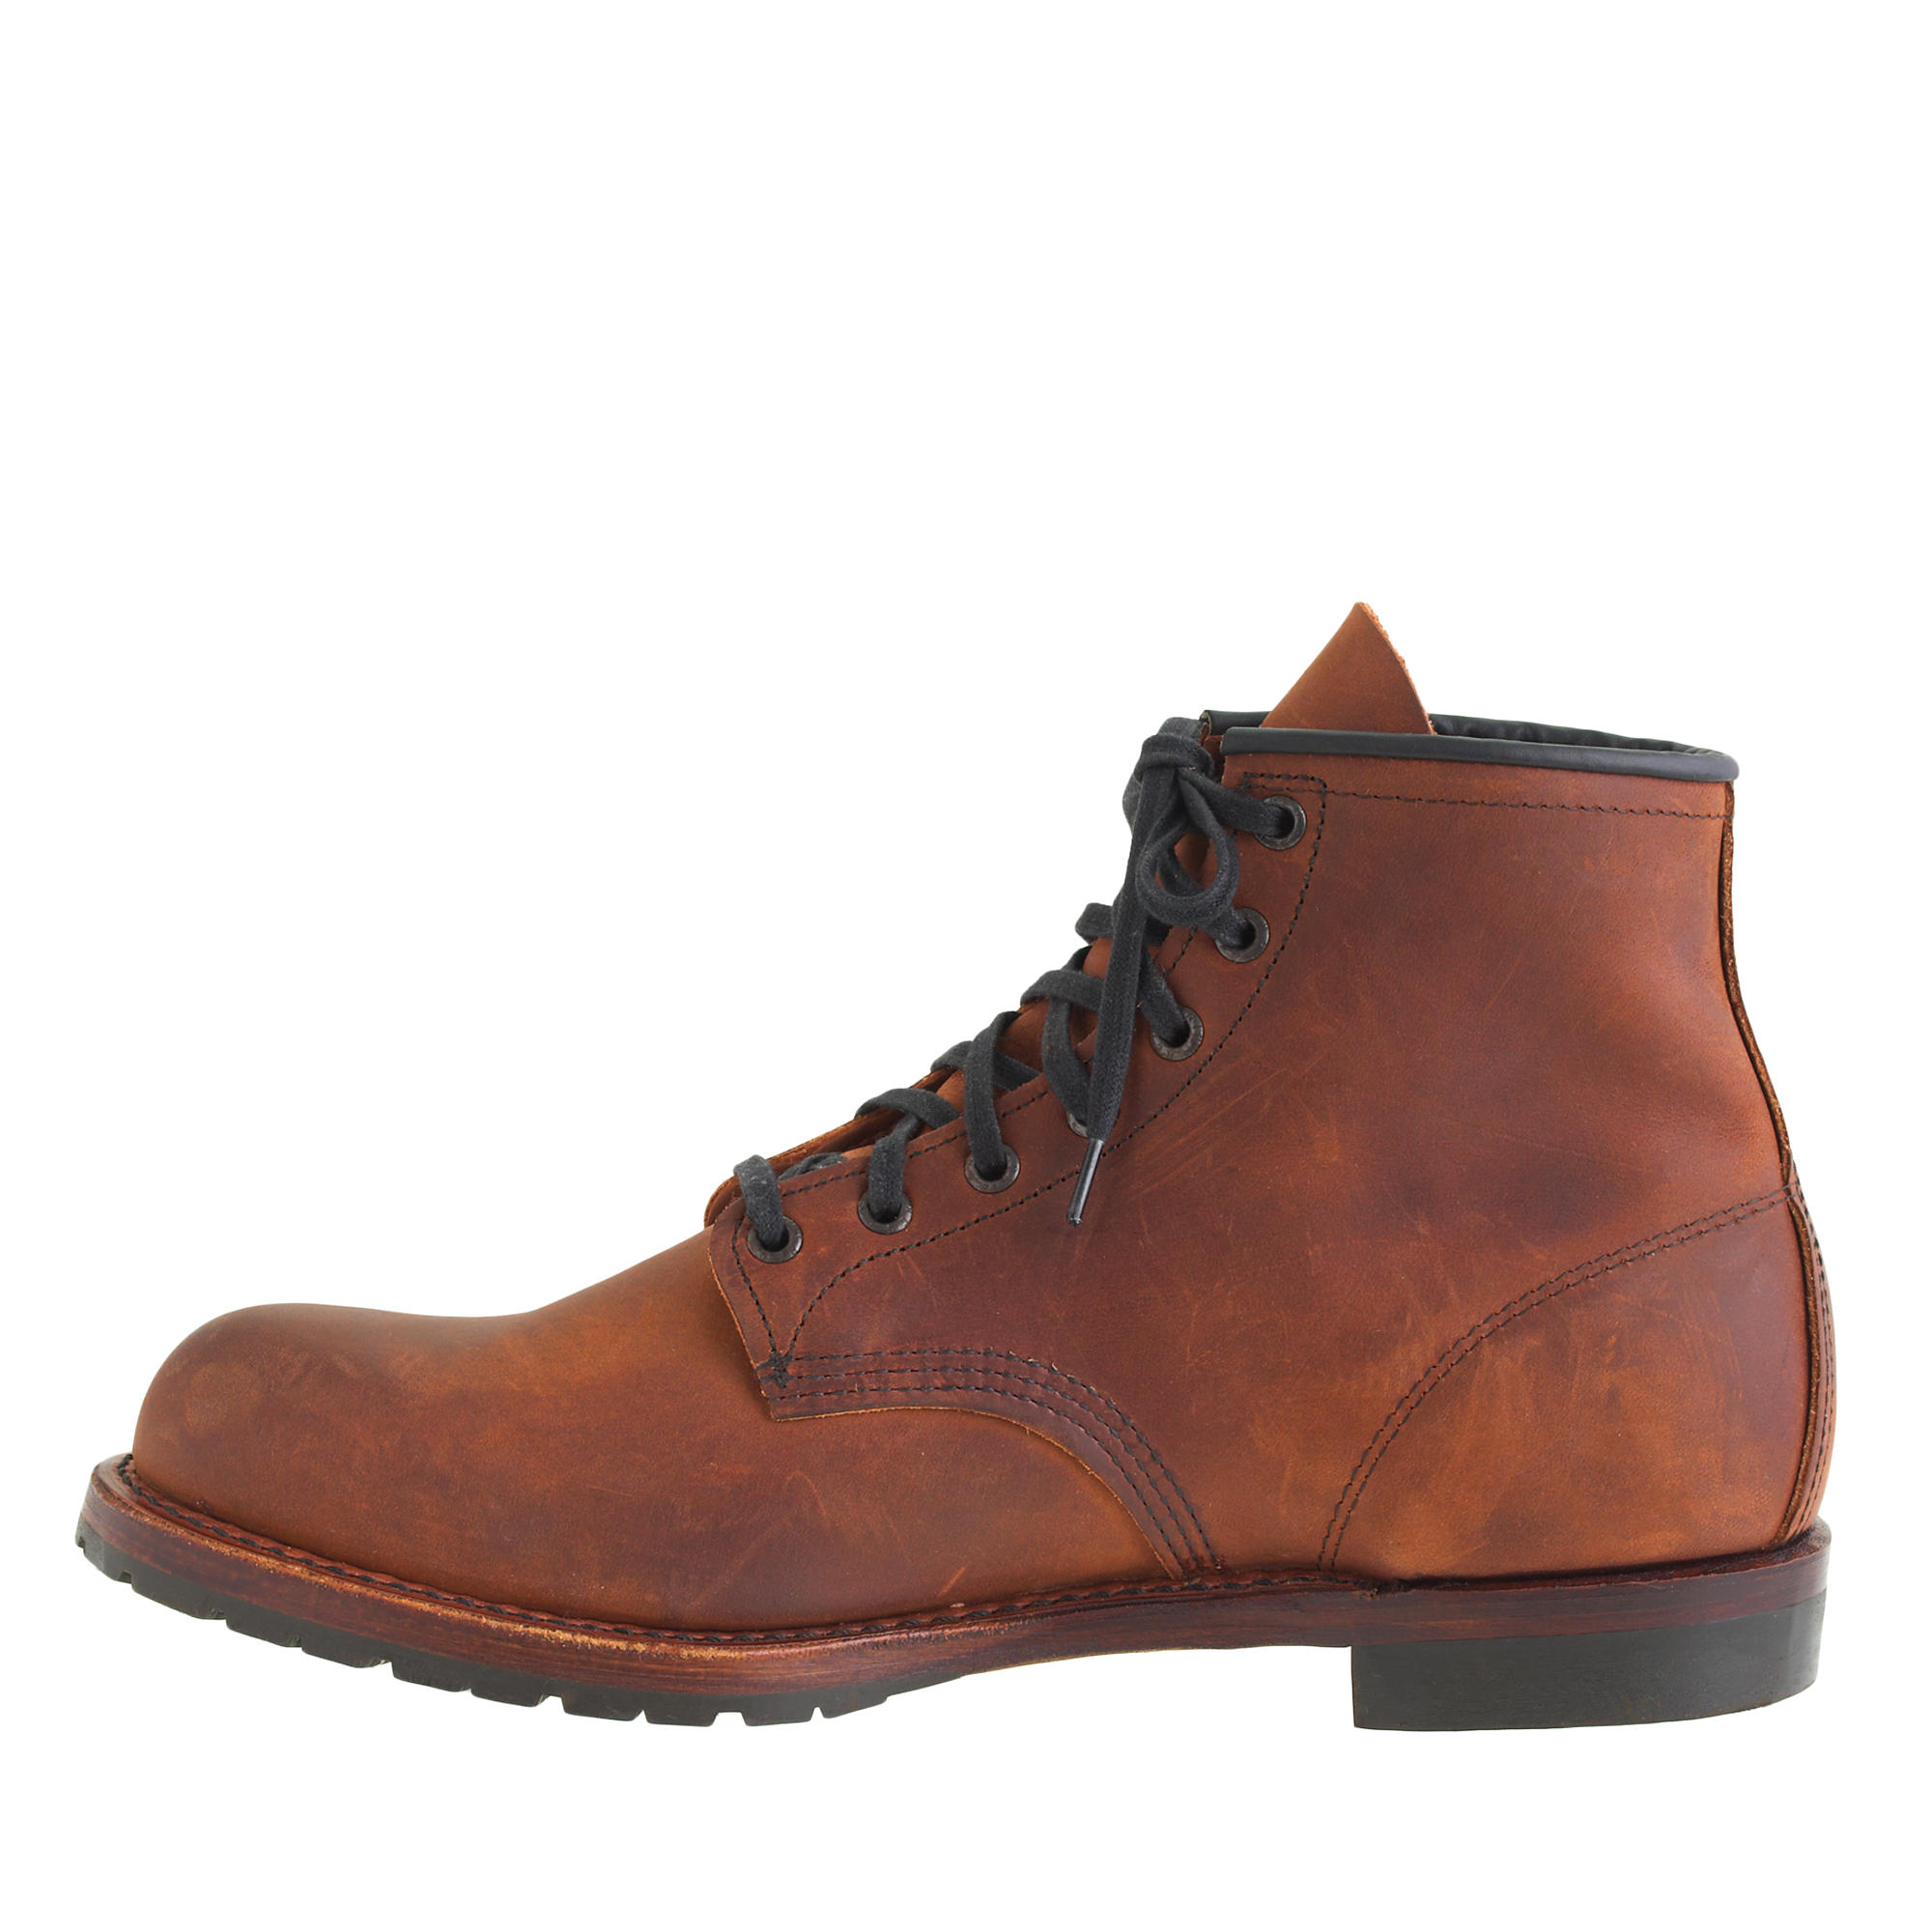 Red Wing Beckman Boots in Dark Brown (Brown) for Men - Lyst